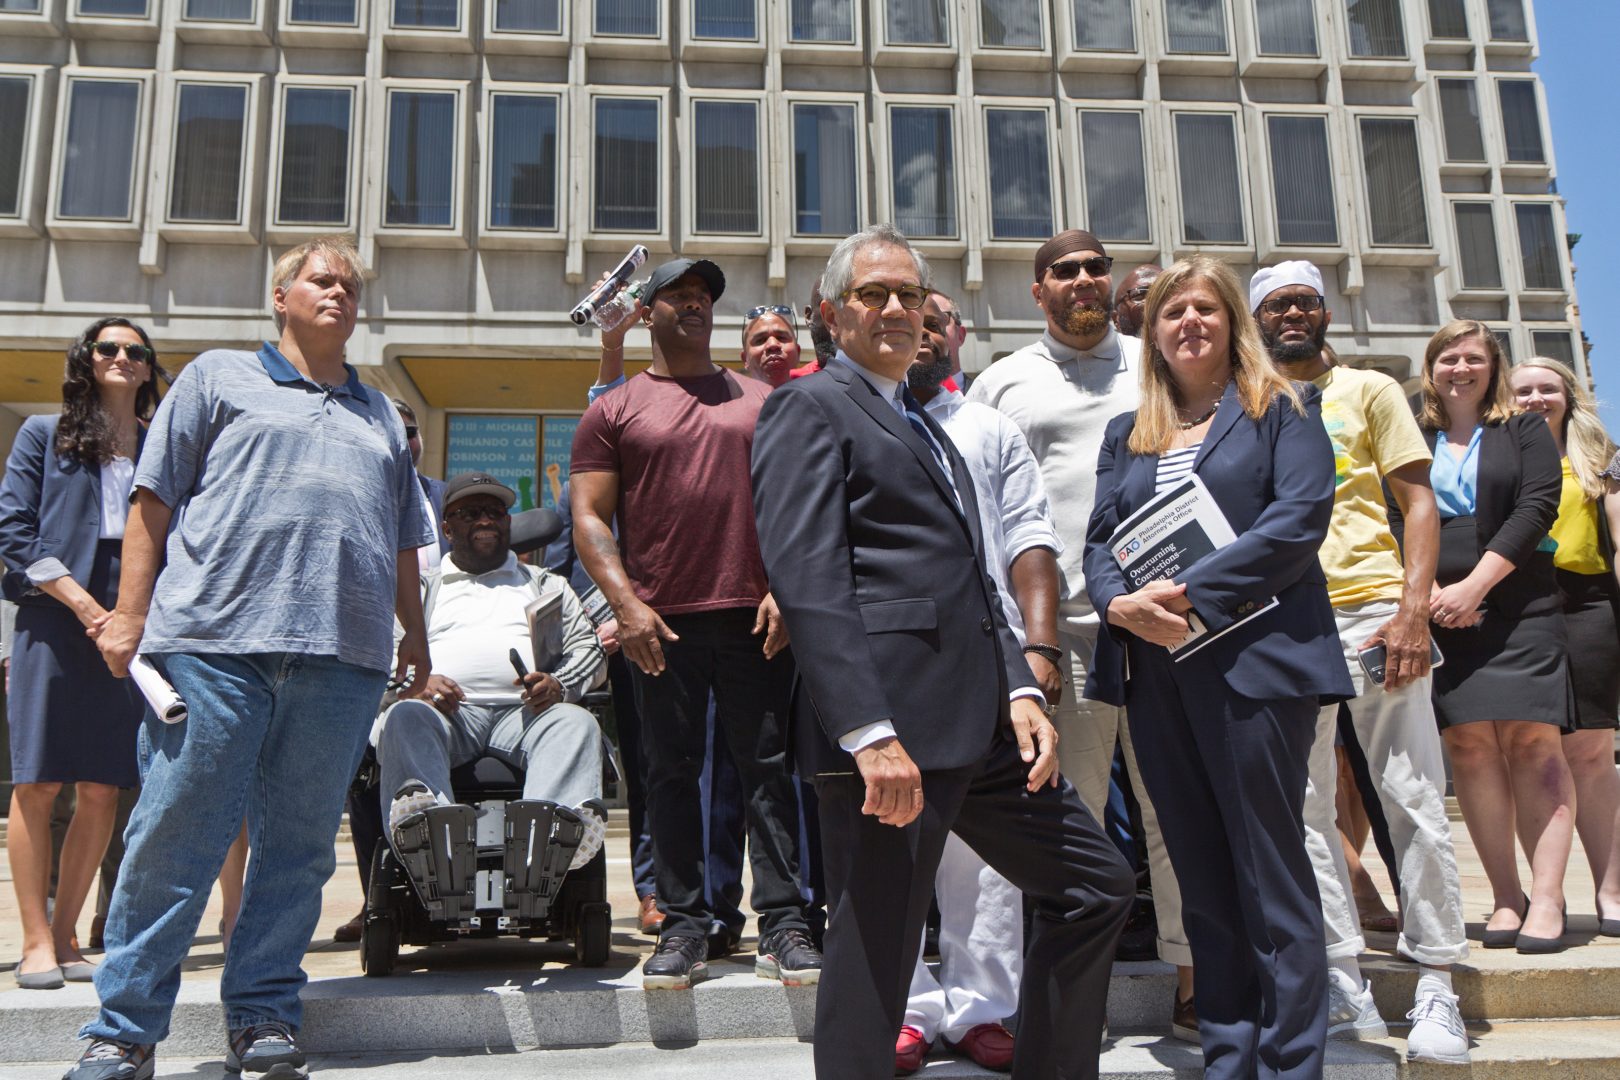 Philadelphia District Attorney Larry Krasner, the office’s CIU (Conviction Integrity Unit), and exonerees stood at the site of the statue of former Philadelphia Mayor Frank Rizzo, which was removed from Thomas Paine Plaza last year, calling the release of a report on wrongful convictions in the city on June 15, 2021, “an end of an era.”